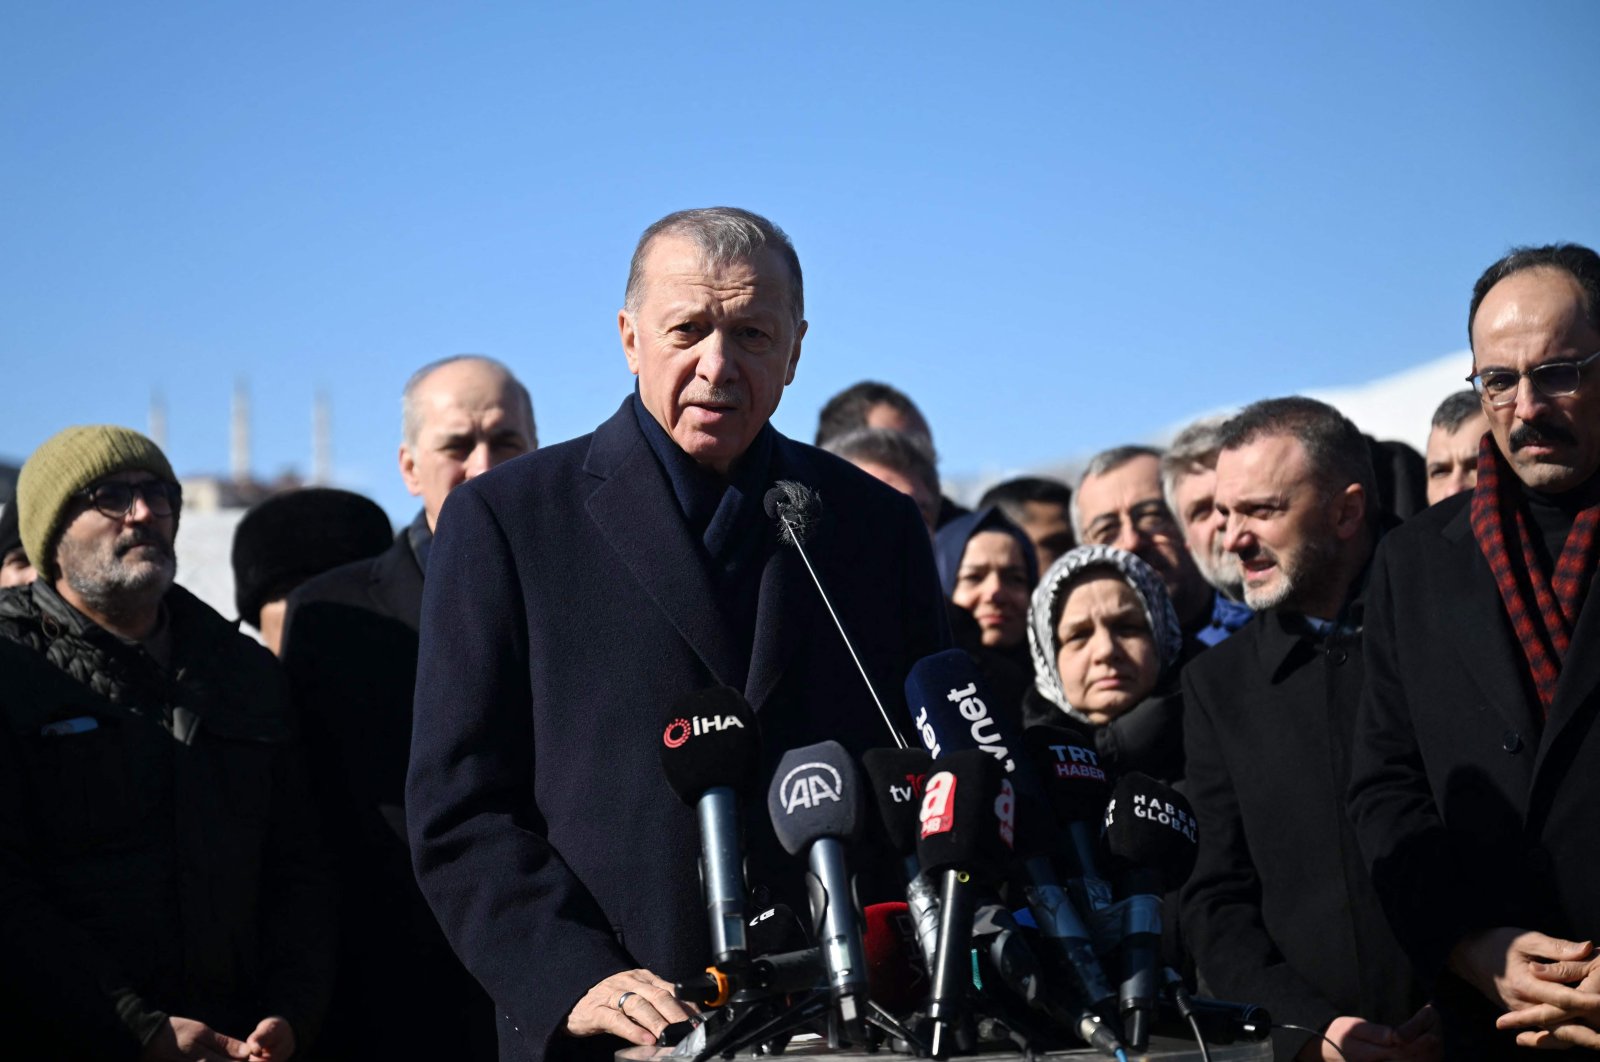 President Recep Tayyip Erdoğan talks to the press during his visit to the southeastern Turkish city of Kahramanmaraş, two days after a strong earthquake struck the region, on Feb. 8, 2023. (AFP Photo)